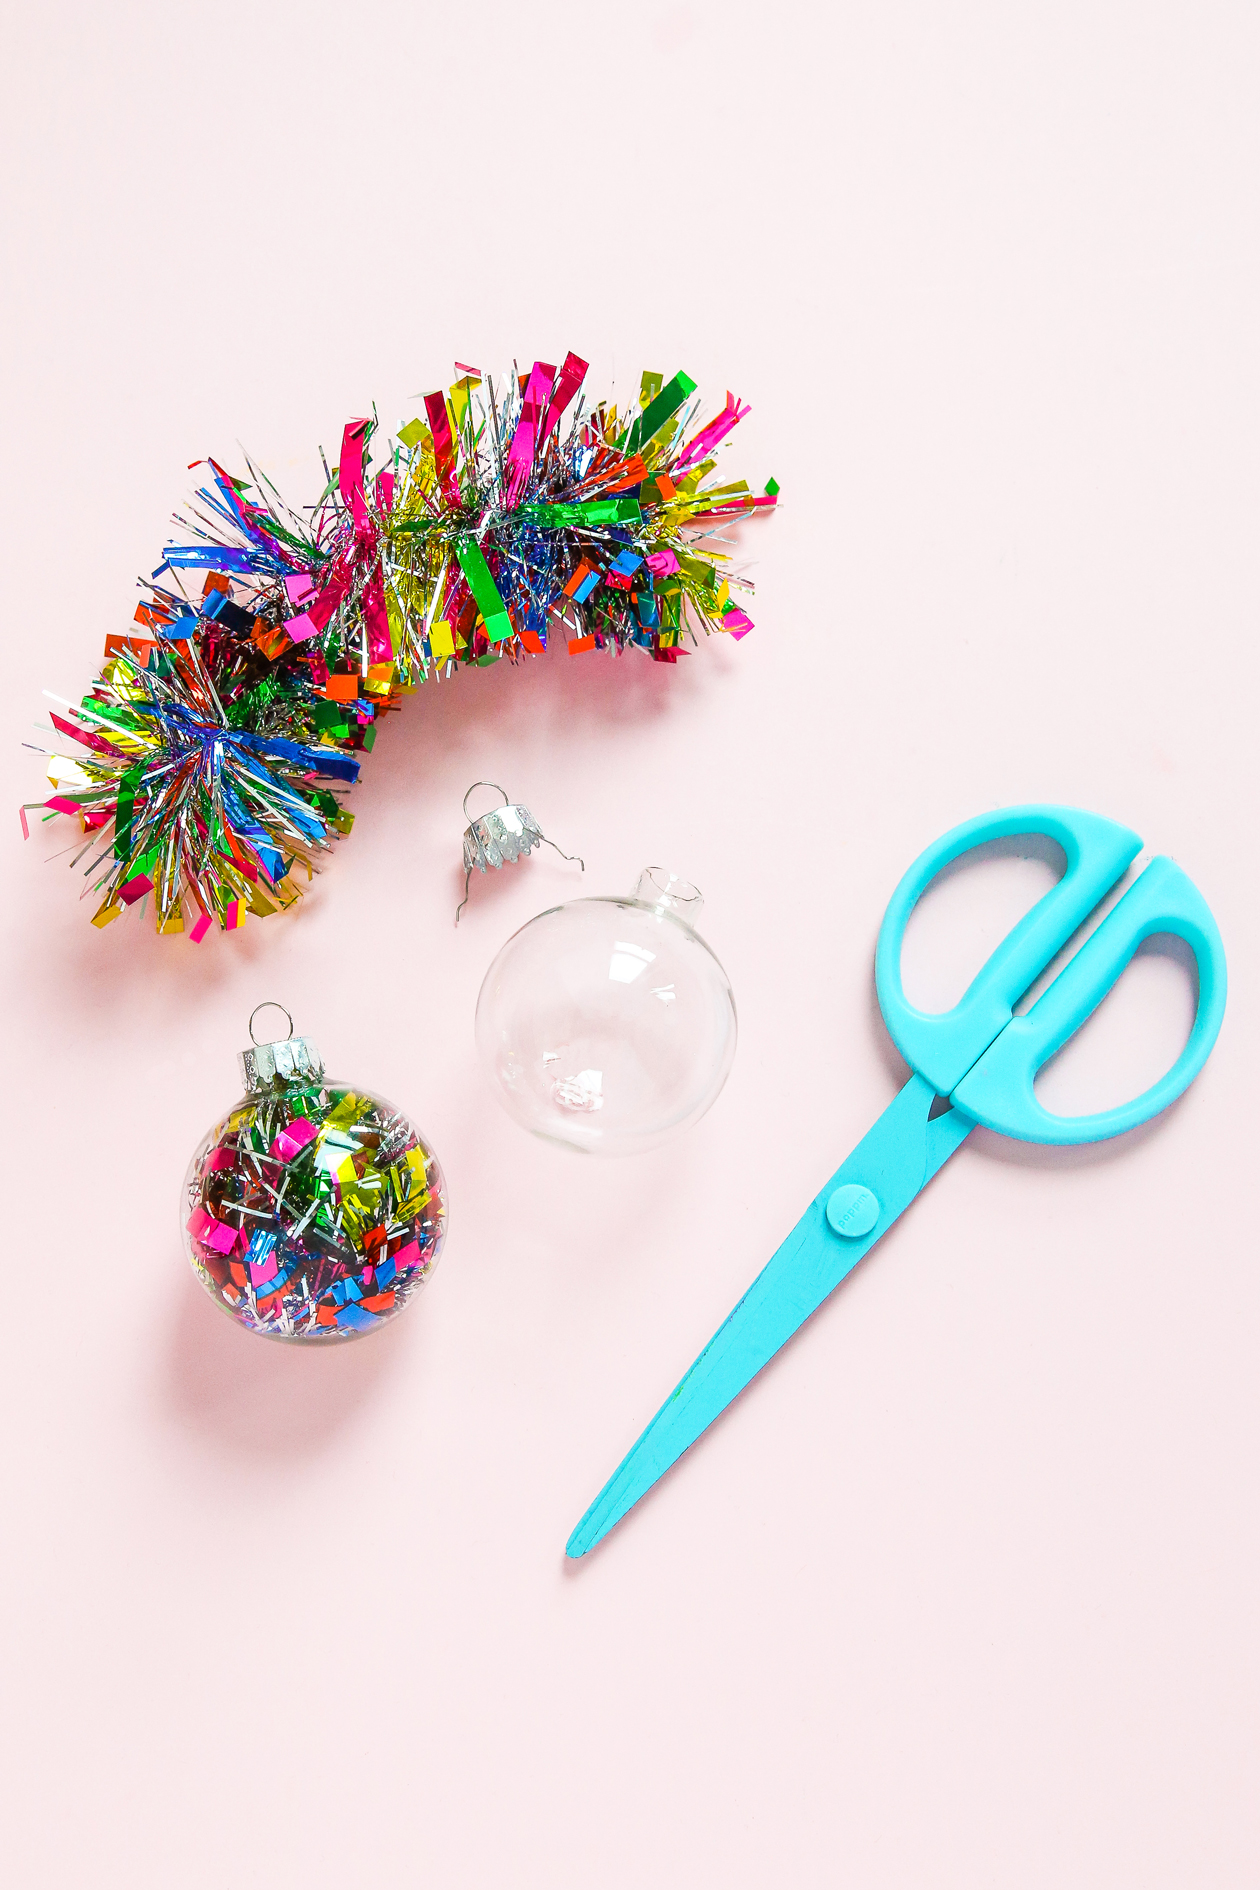 Looking for a quick Christmas craft?! You can make this DIY Tinsel Ornament in 10 minutes to less! Great for colorful Christmas decor and a great holiday upcycle project!